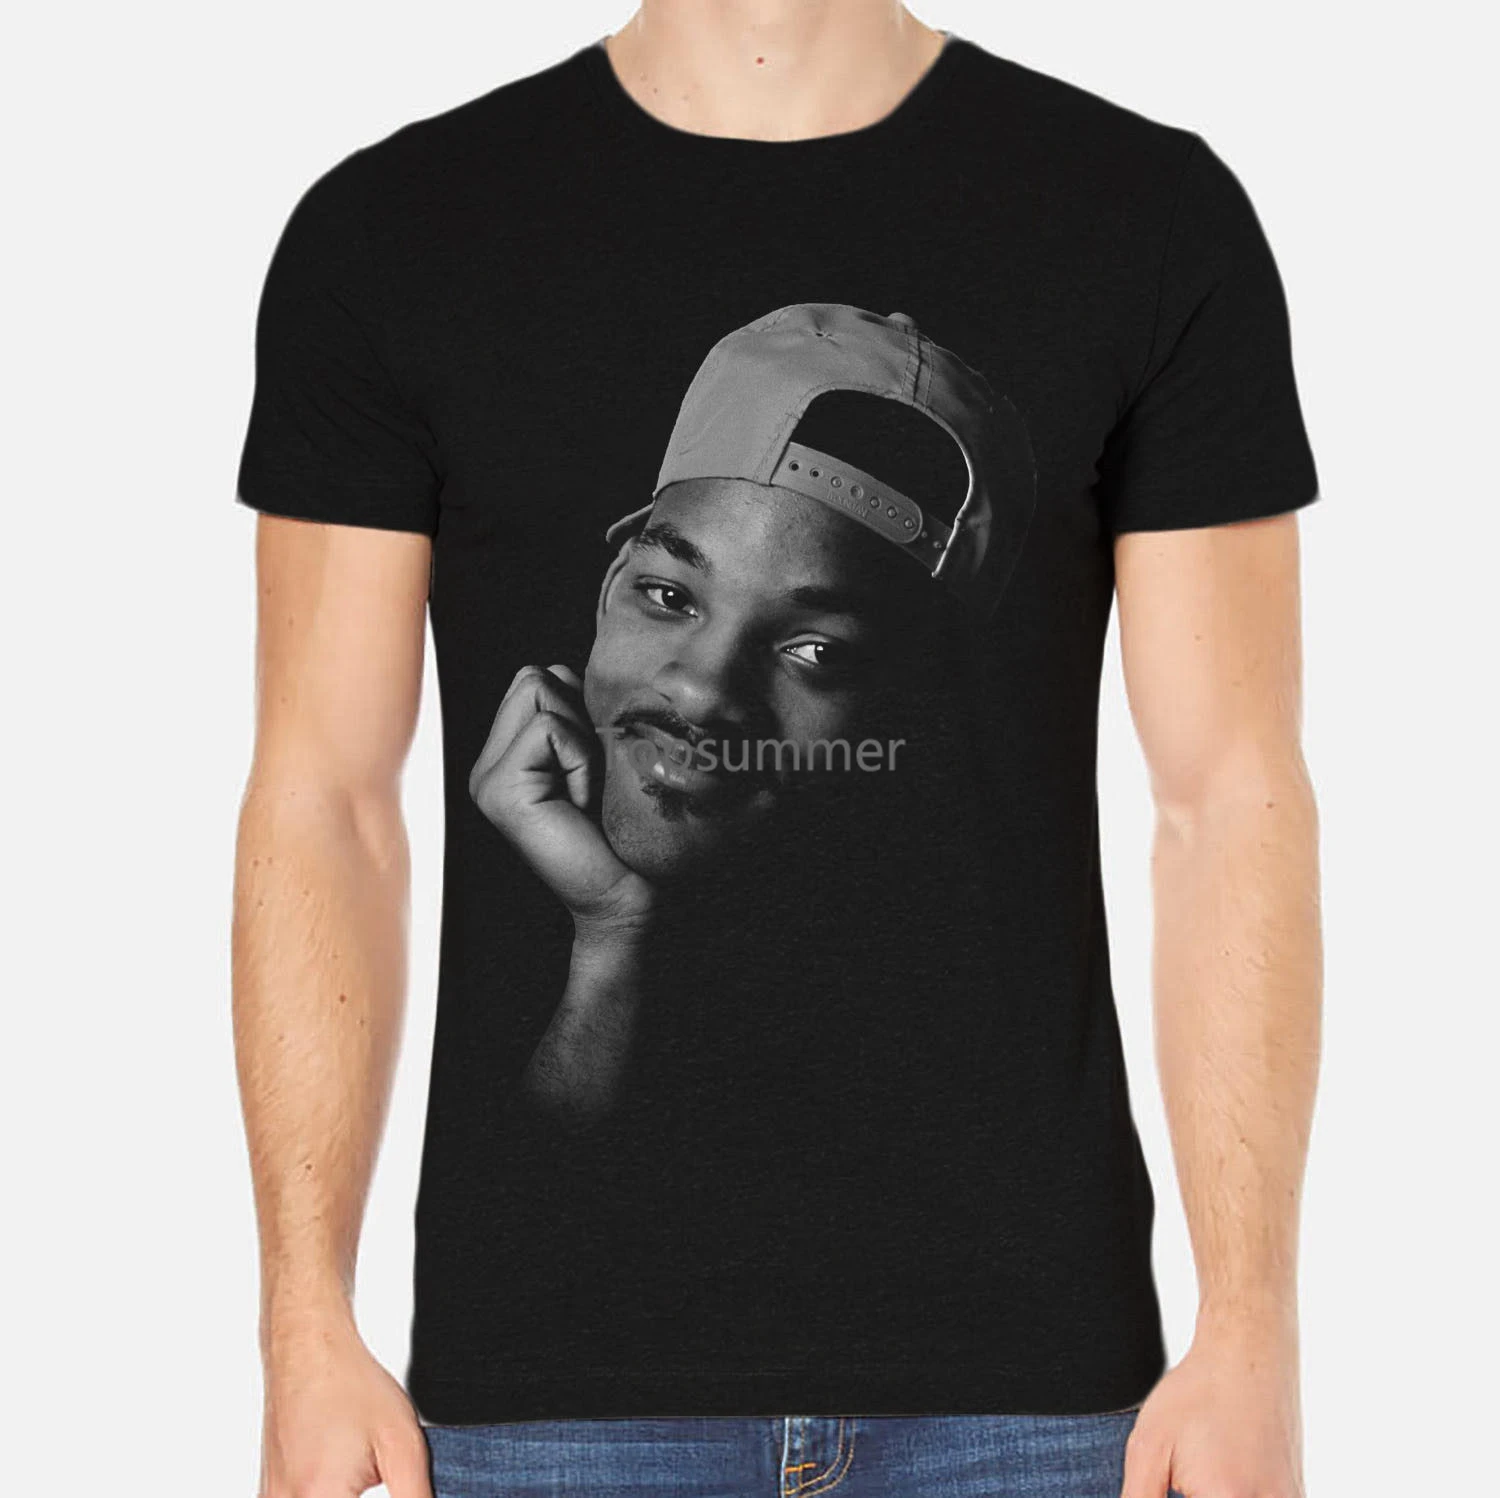 

Will Smith Fresh Prince Of Bel Air New Men T-Shirt Black Clothing 3-A-007